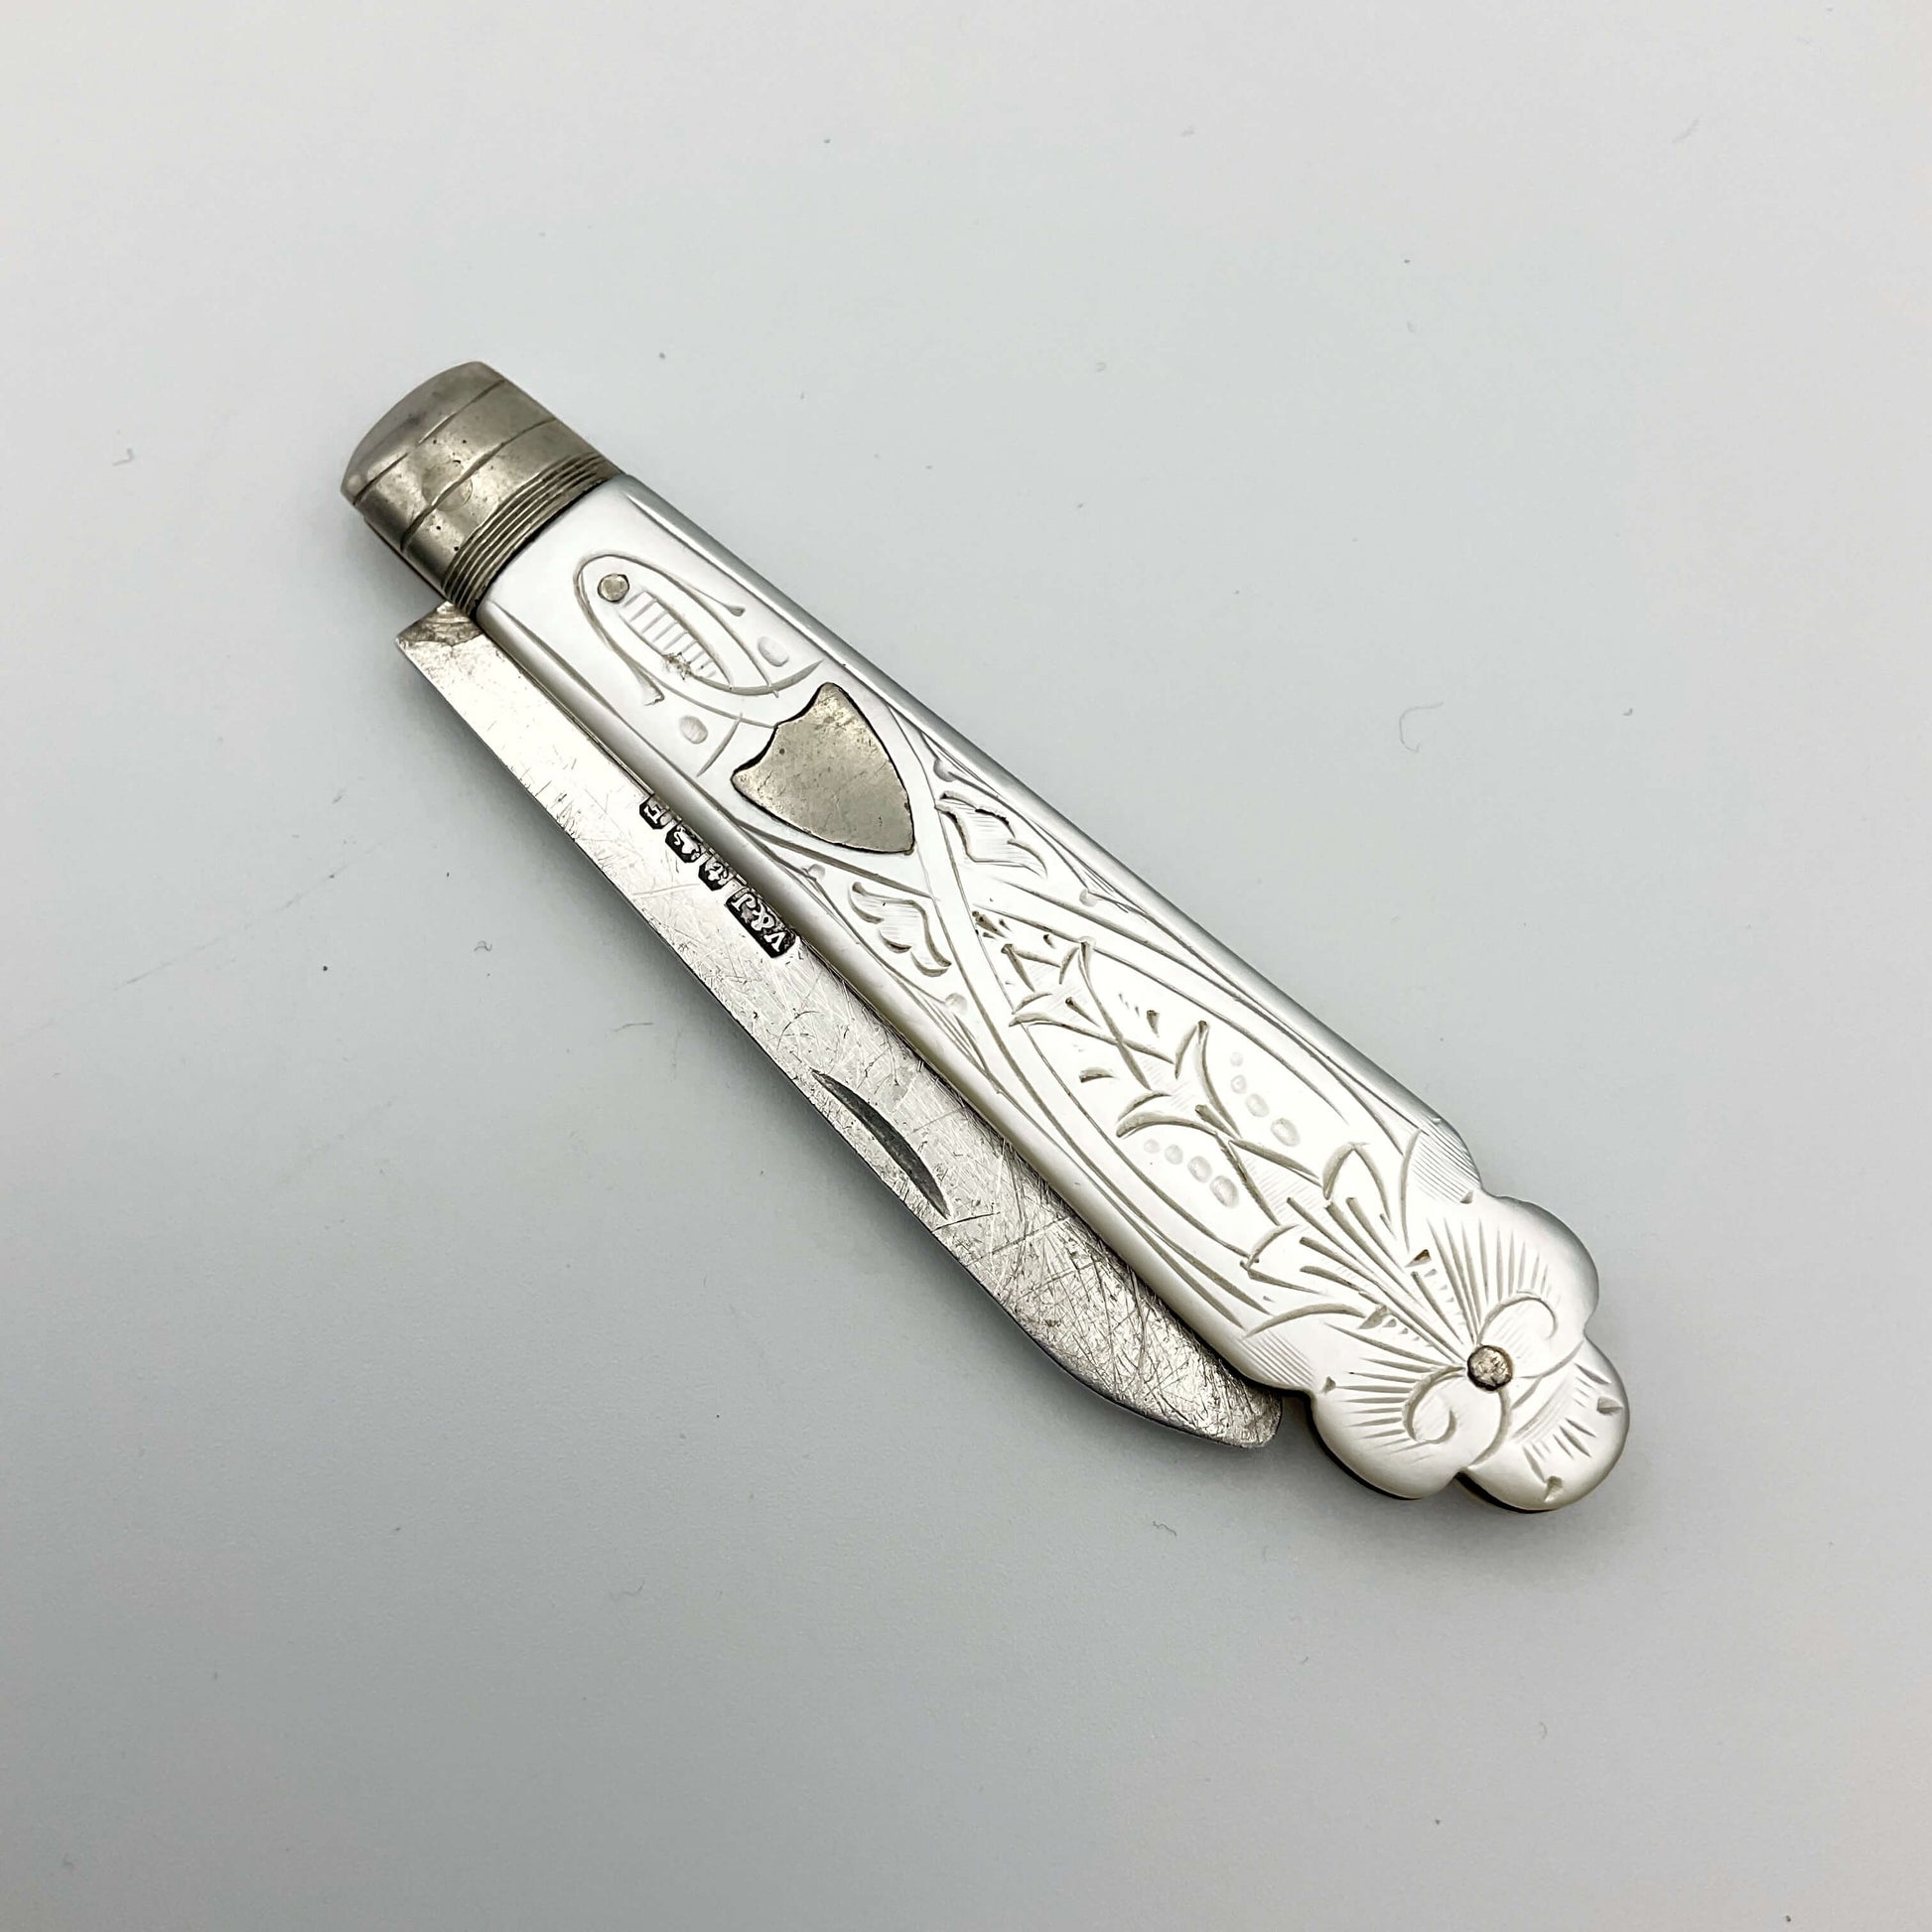 Vintage silver fruit knife with a beautifully engraved mother of pearl handle with the blade folded away into the handle.